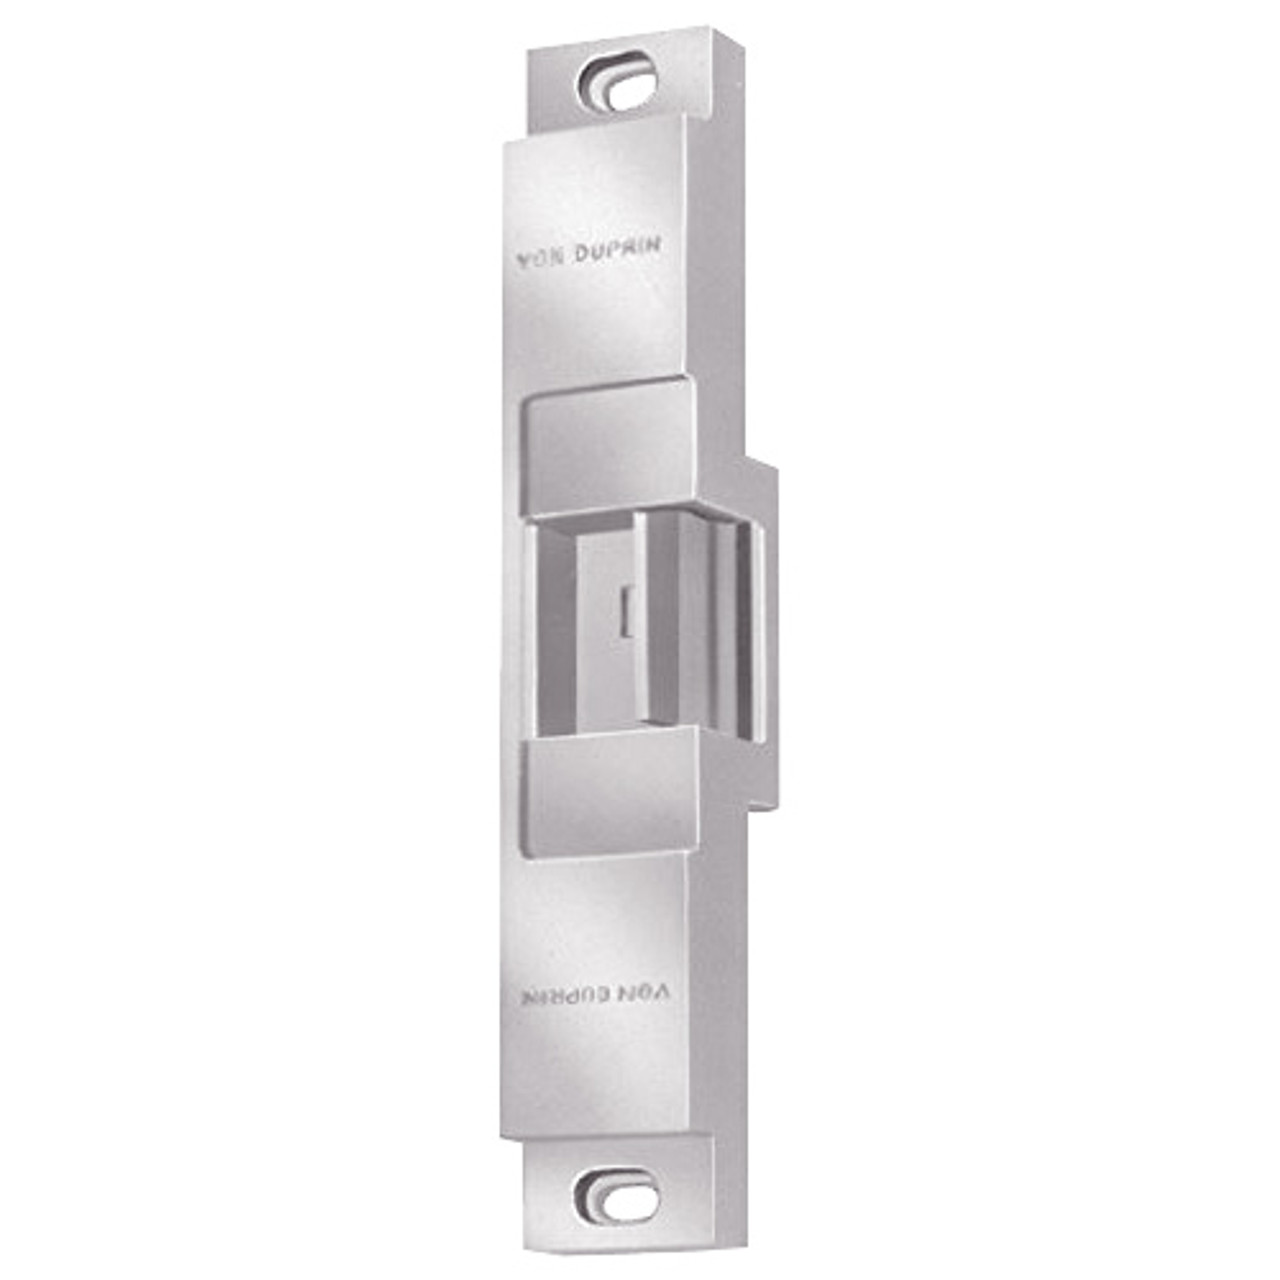 6112-DS-24VDC-US32 Von Duprin Electric Strike in Bright Stainless Steel Finish